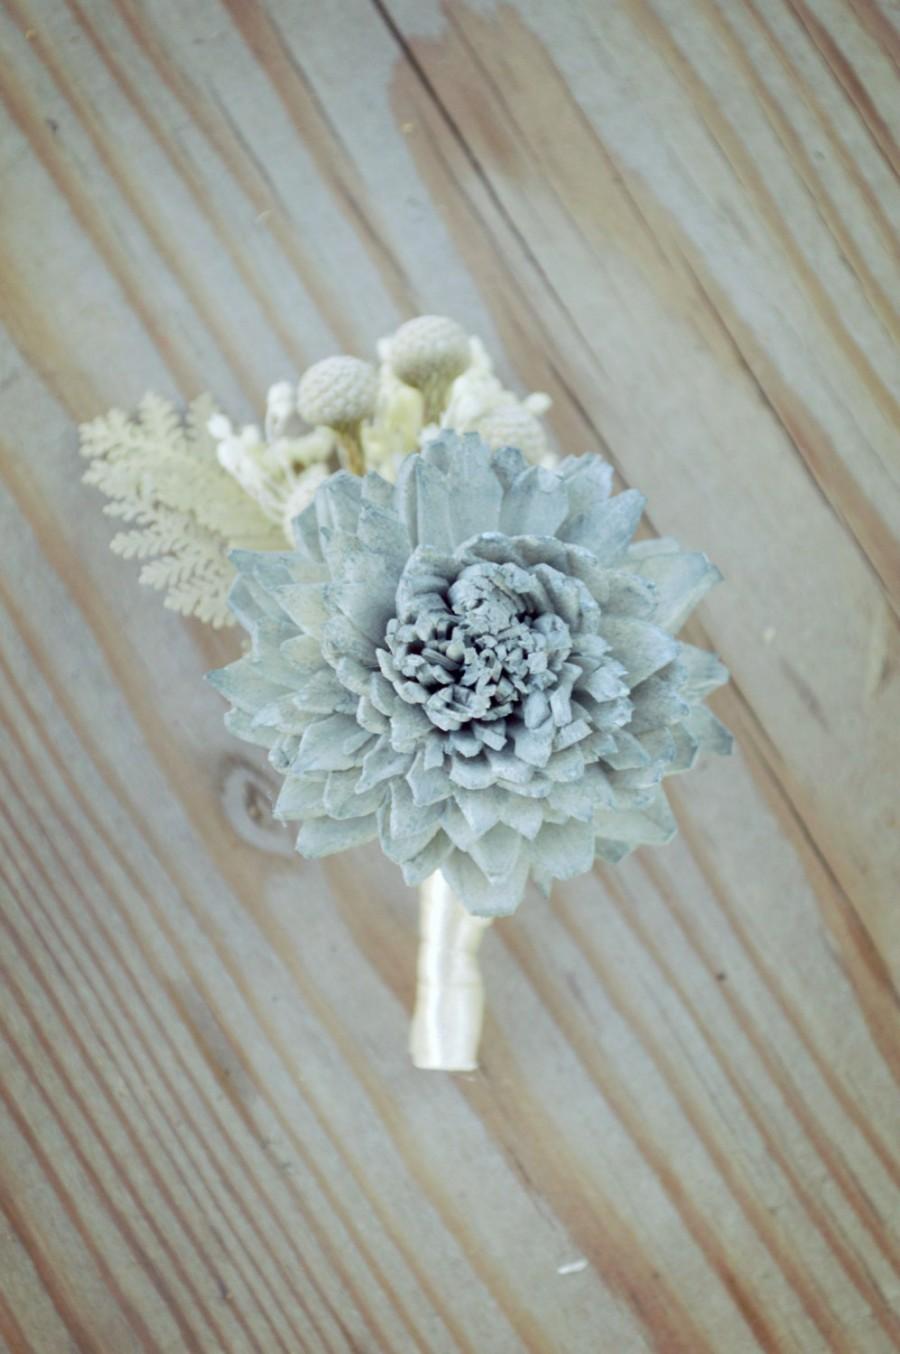 Wedding - Slate Wedding Collection Boutonniere Bouquet Sola Flowers and dried Flowers Grey Navy Blue Dusty Miller Silver Brunia Anemone